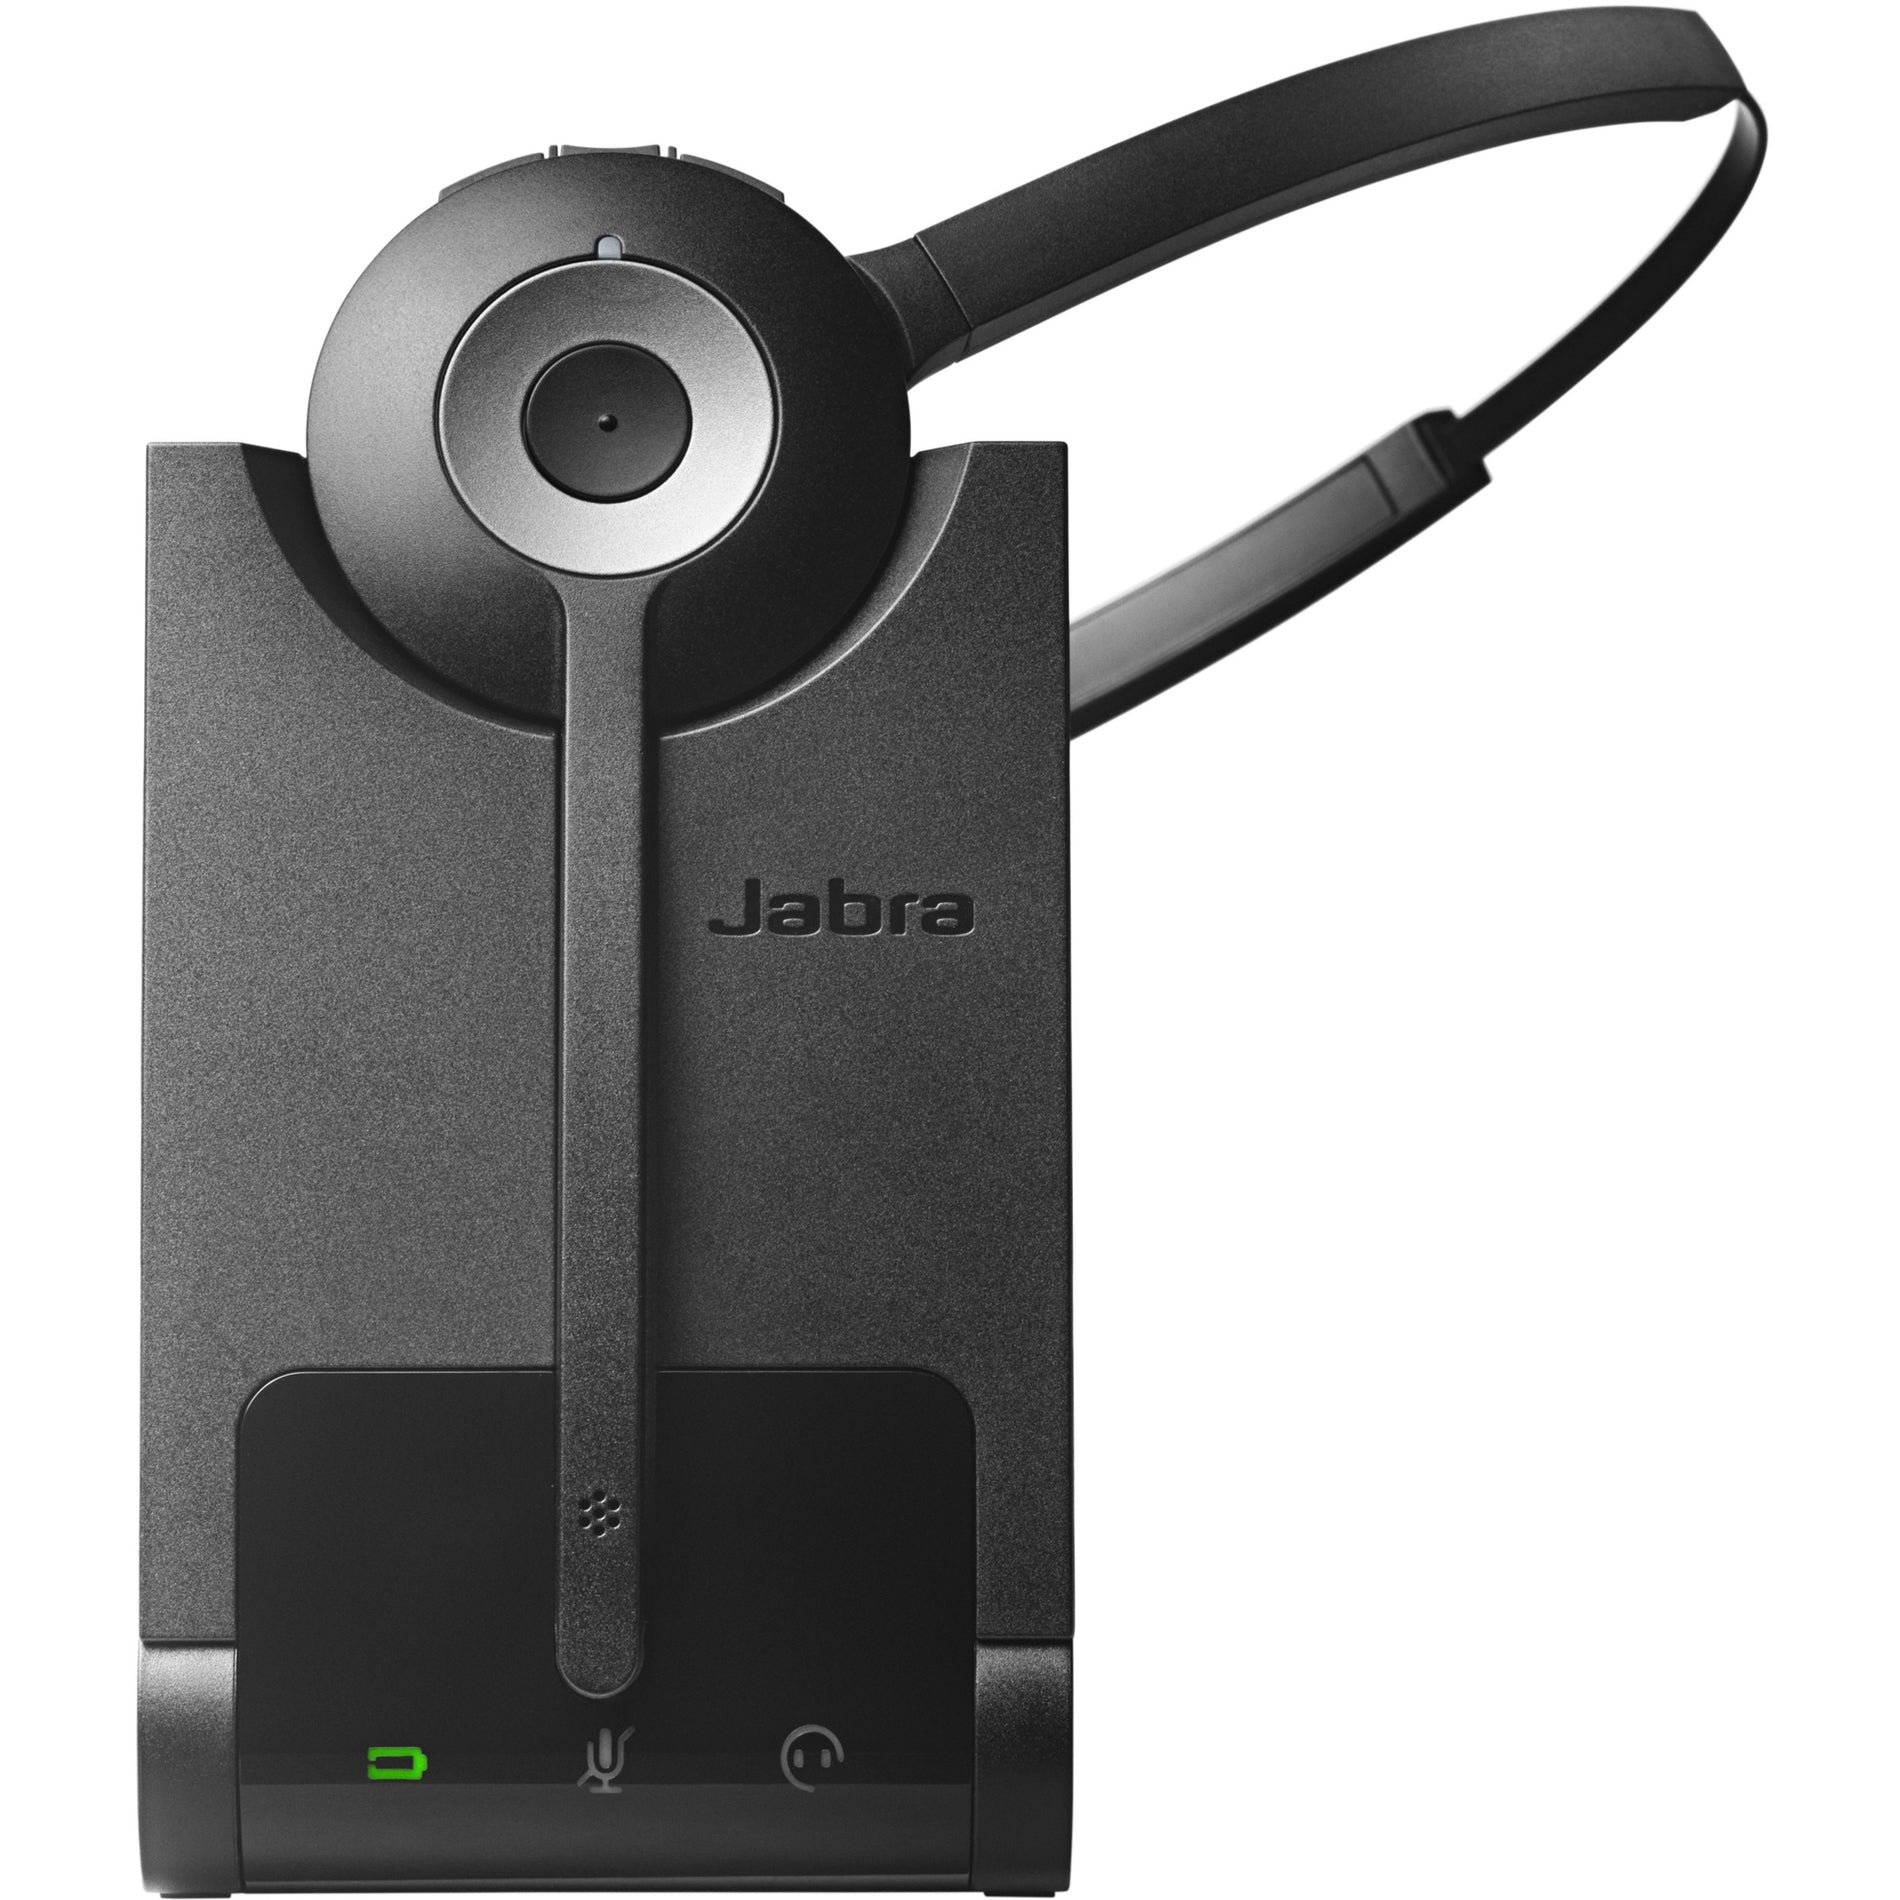 Jabra 920-65-508-105 Pro 920 Mono Headset, Wireless DECT Technology, Noise Cancelling Boom Microphone, 8 Hour Battery Life